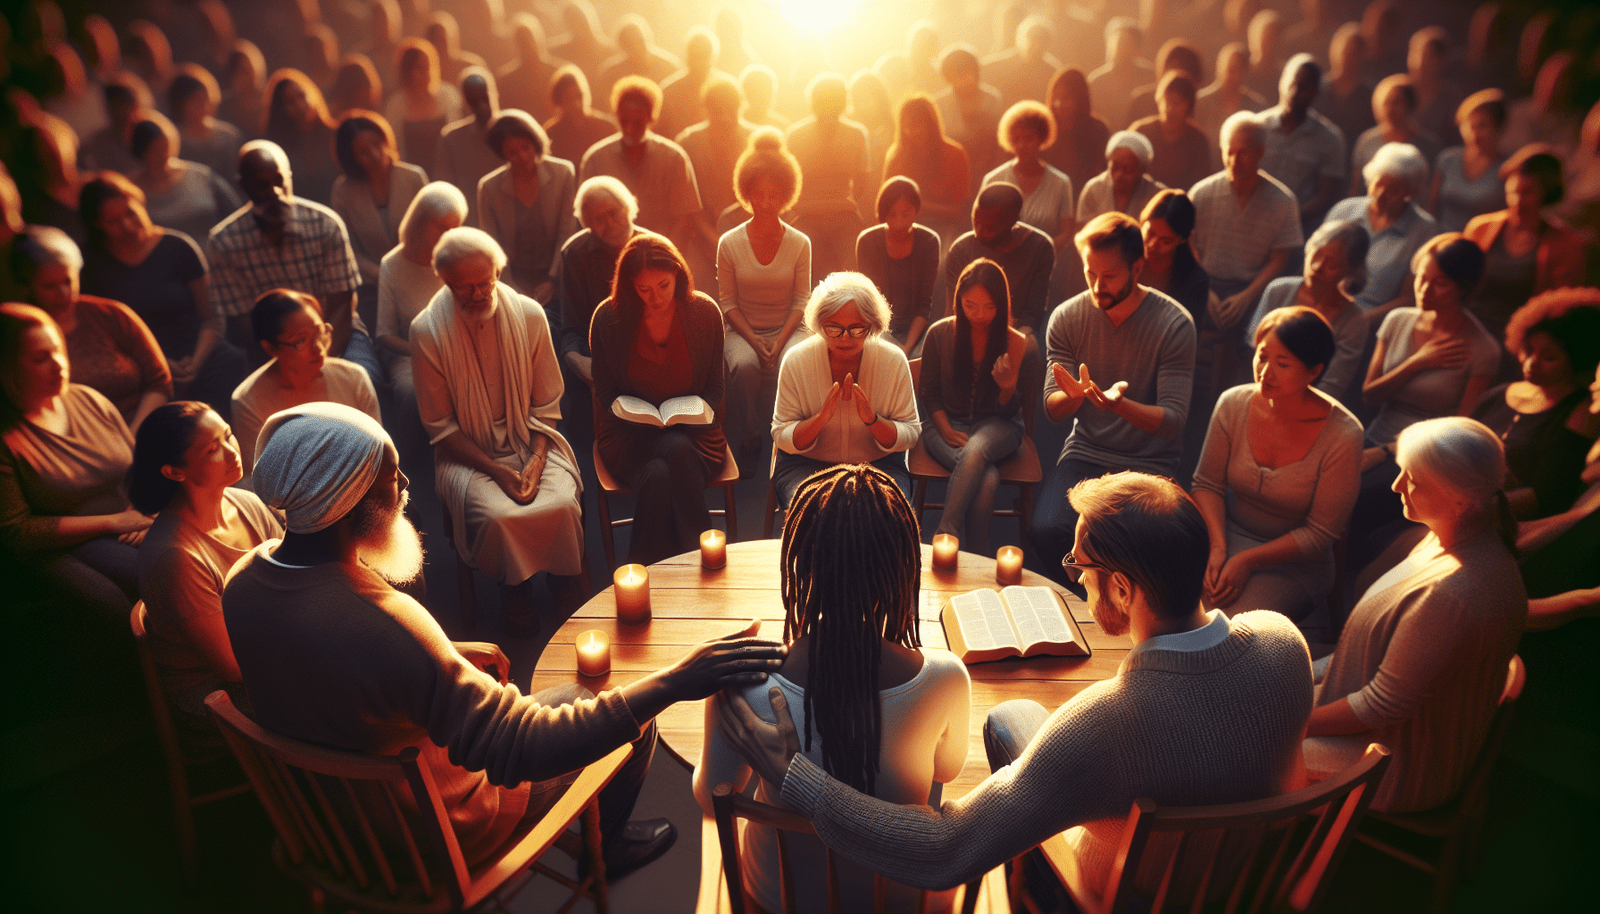 Fostering A Culture Of Reconciliation And Healing In Community Bible Study